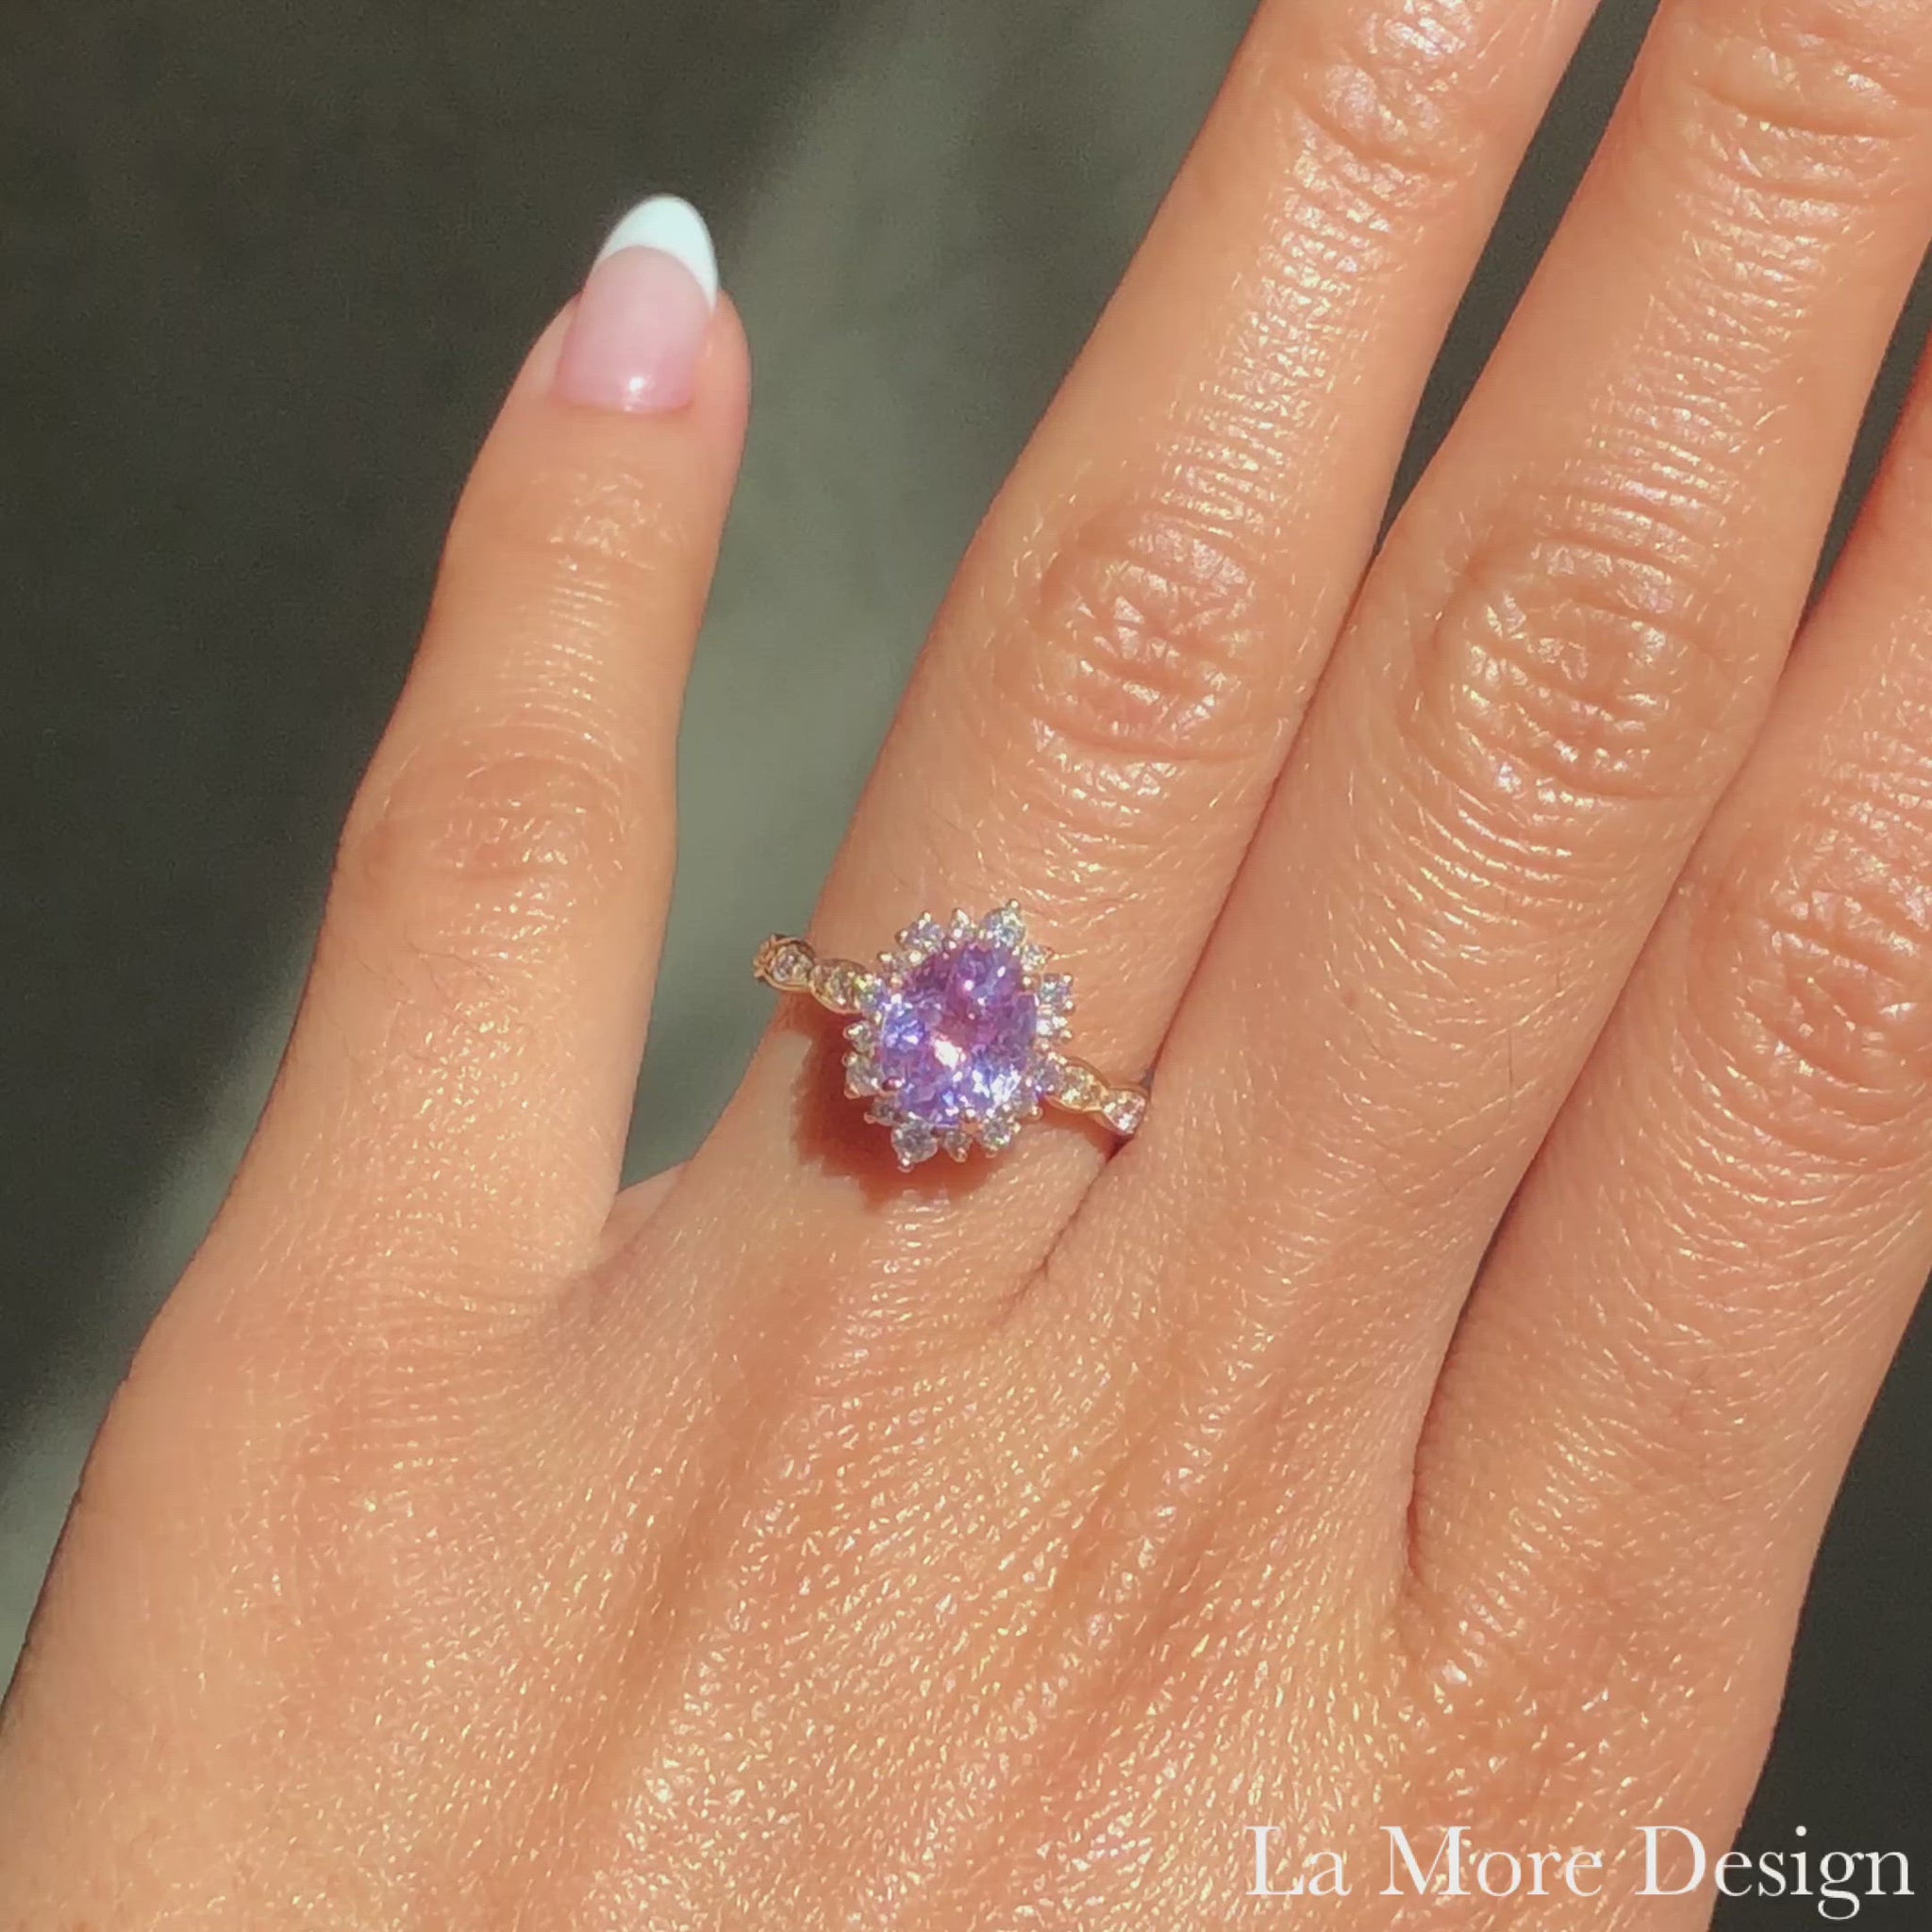 This timelessly elegant and unique lavender purple sapphire engagement ring is crafted in a 14k rose gold Tiara Halo Diamond ring setting with a large 2.26-carat oval cut natural sapphire center ~the total gemstone and diamond weight of the whole ring is 2.76 ct.tw.  This one-of-a-kind sapphire ring is perfect for brides looking for non-traditional engagement rings. All our wedding bands can pair beautifully with this gorgeous tiara halo diamond sapphire ring!